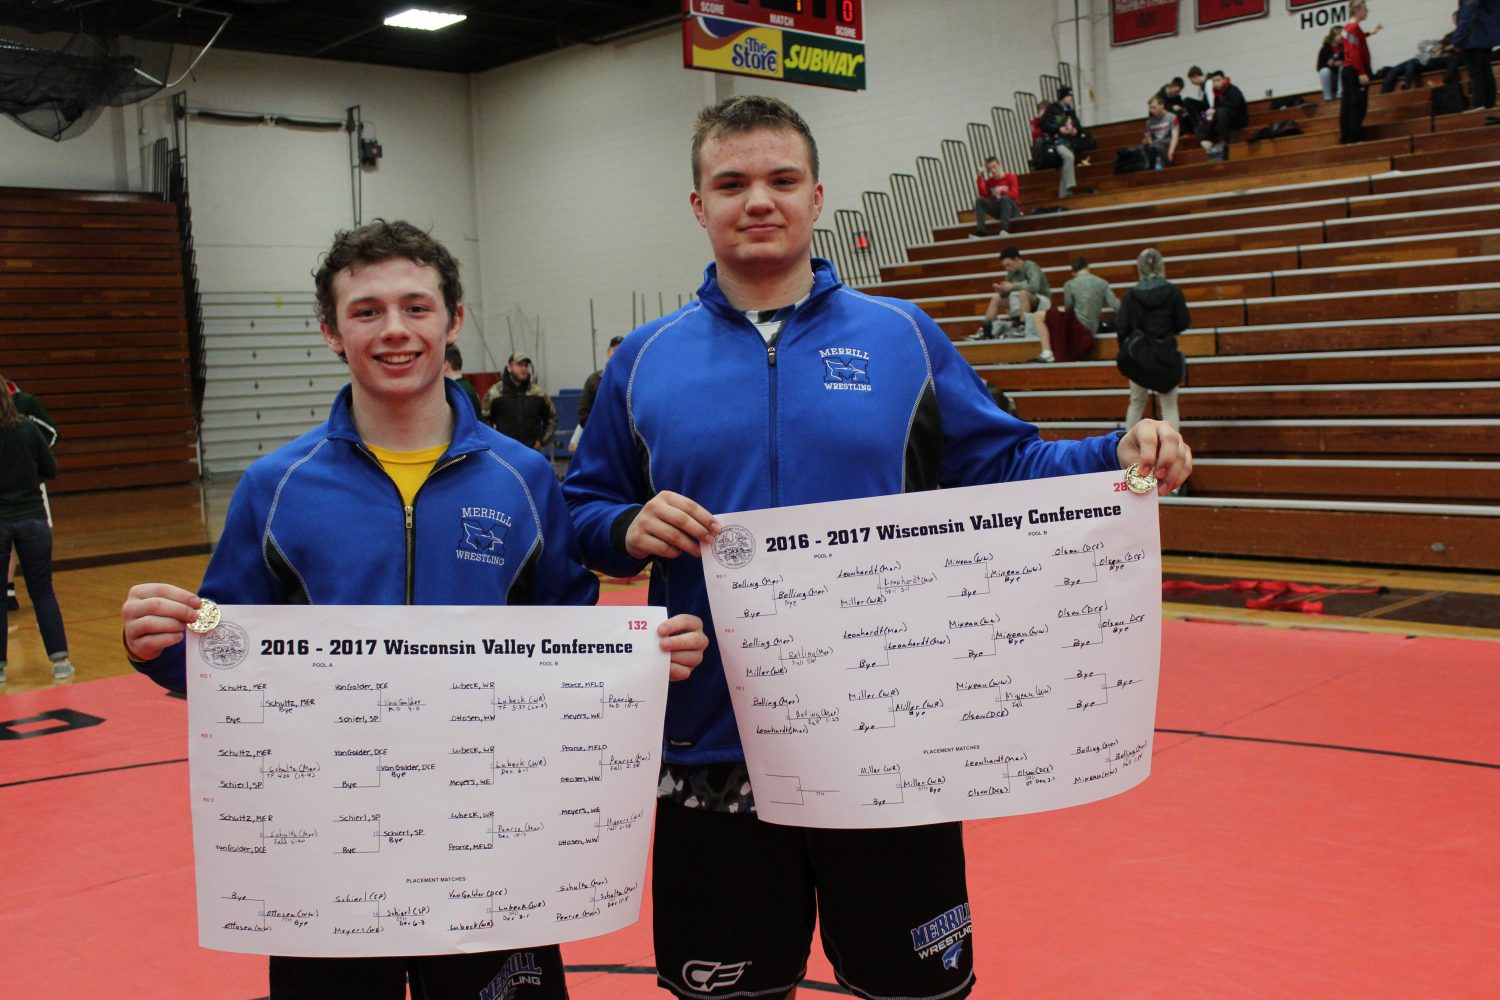 Bluejay wrestlers land in 5th at WVC meet